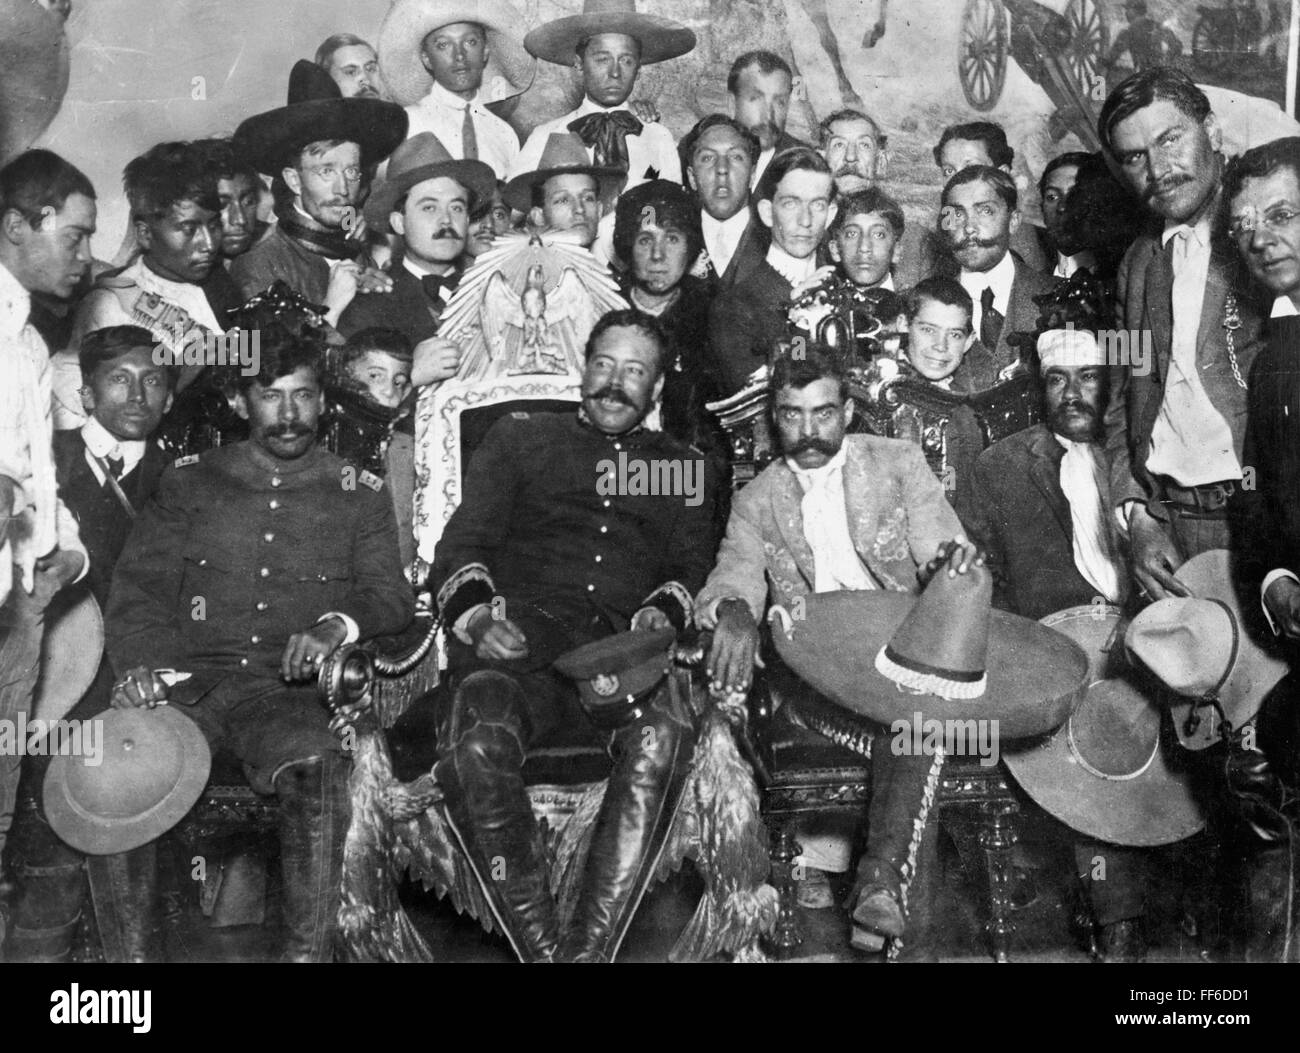 FRANCISCO 'PANCHO' VILLA/n(1878-1923). Mexican revolutionary leader. Villa (center) and Emiliano Zapata (next to Villa, right, with sombrero on knee) in the Presidential Palace at Mexico City. Seated next to them are revolutionary generals Tomßs Urbina (l Stock Photo